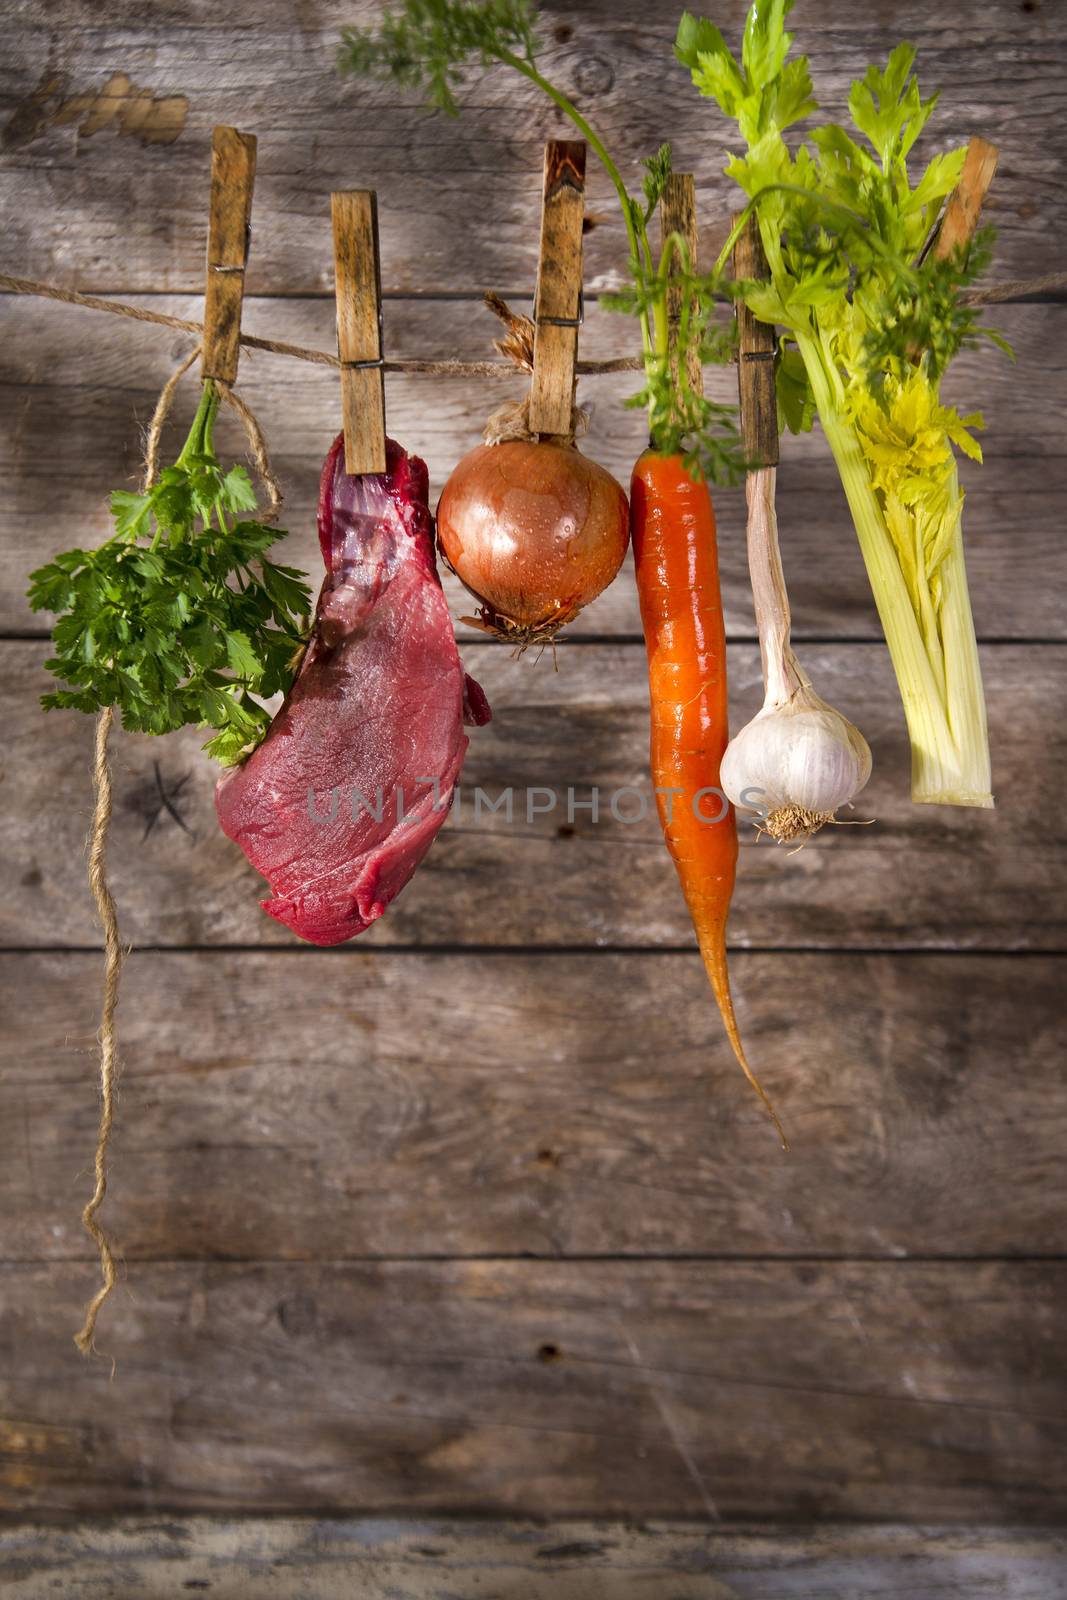 Ingredients needed for the preparation of the broth of beef